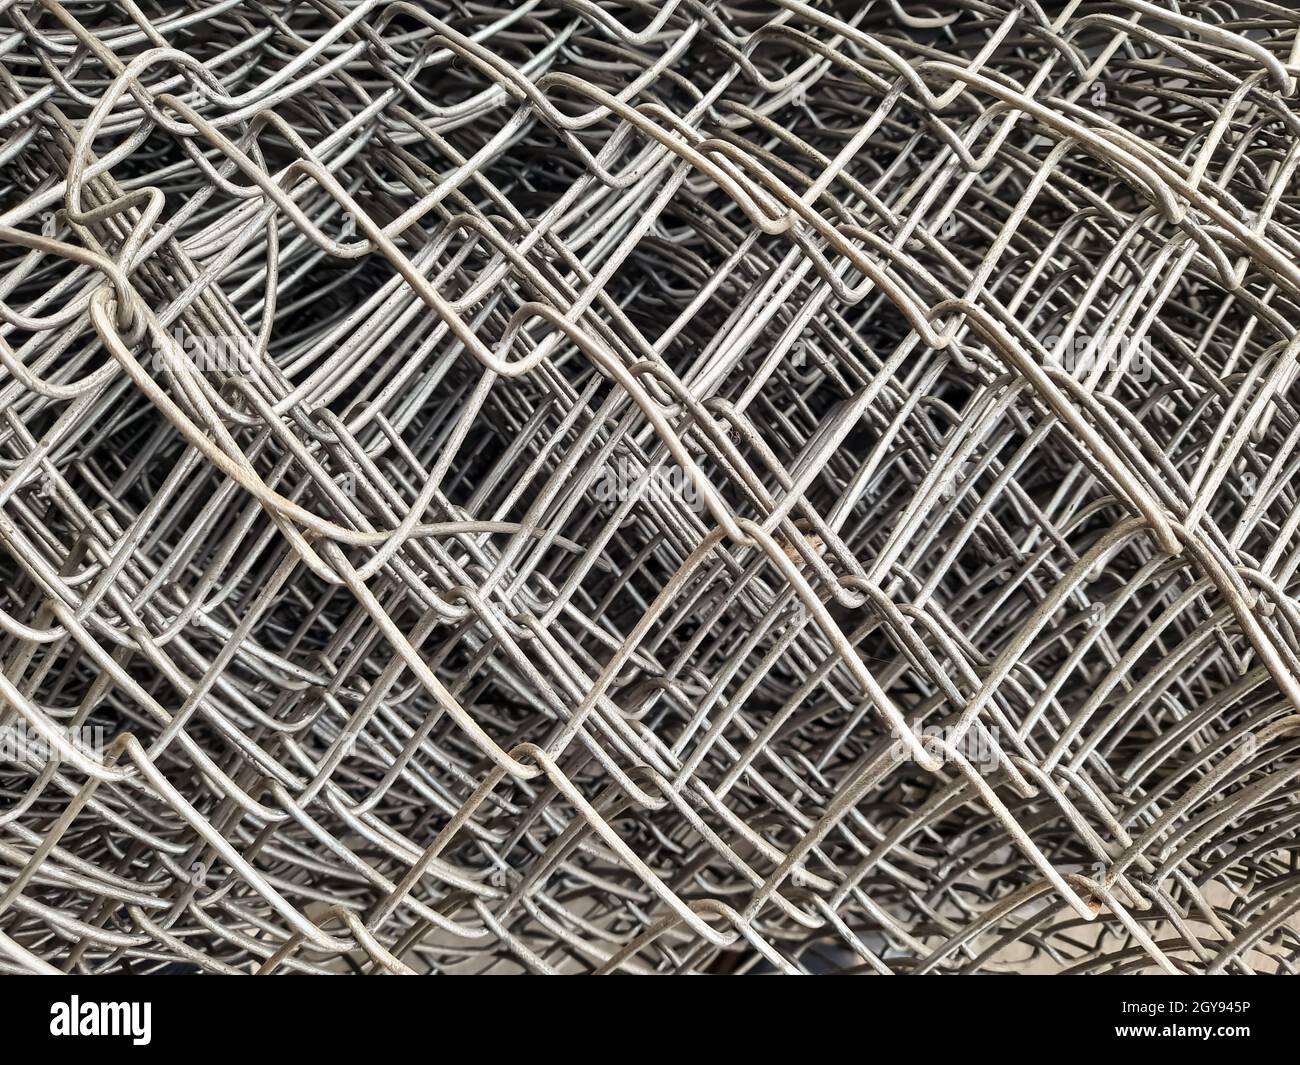 Welded Mesh Of Steel Reinforcement For Concrete High Resolution Stock  Photography and Images - Alamy